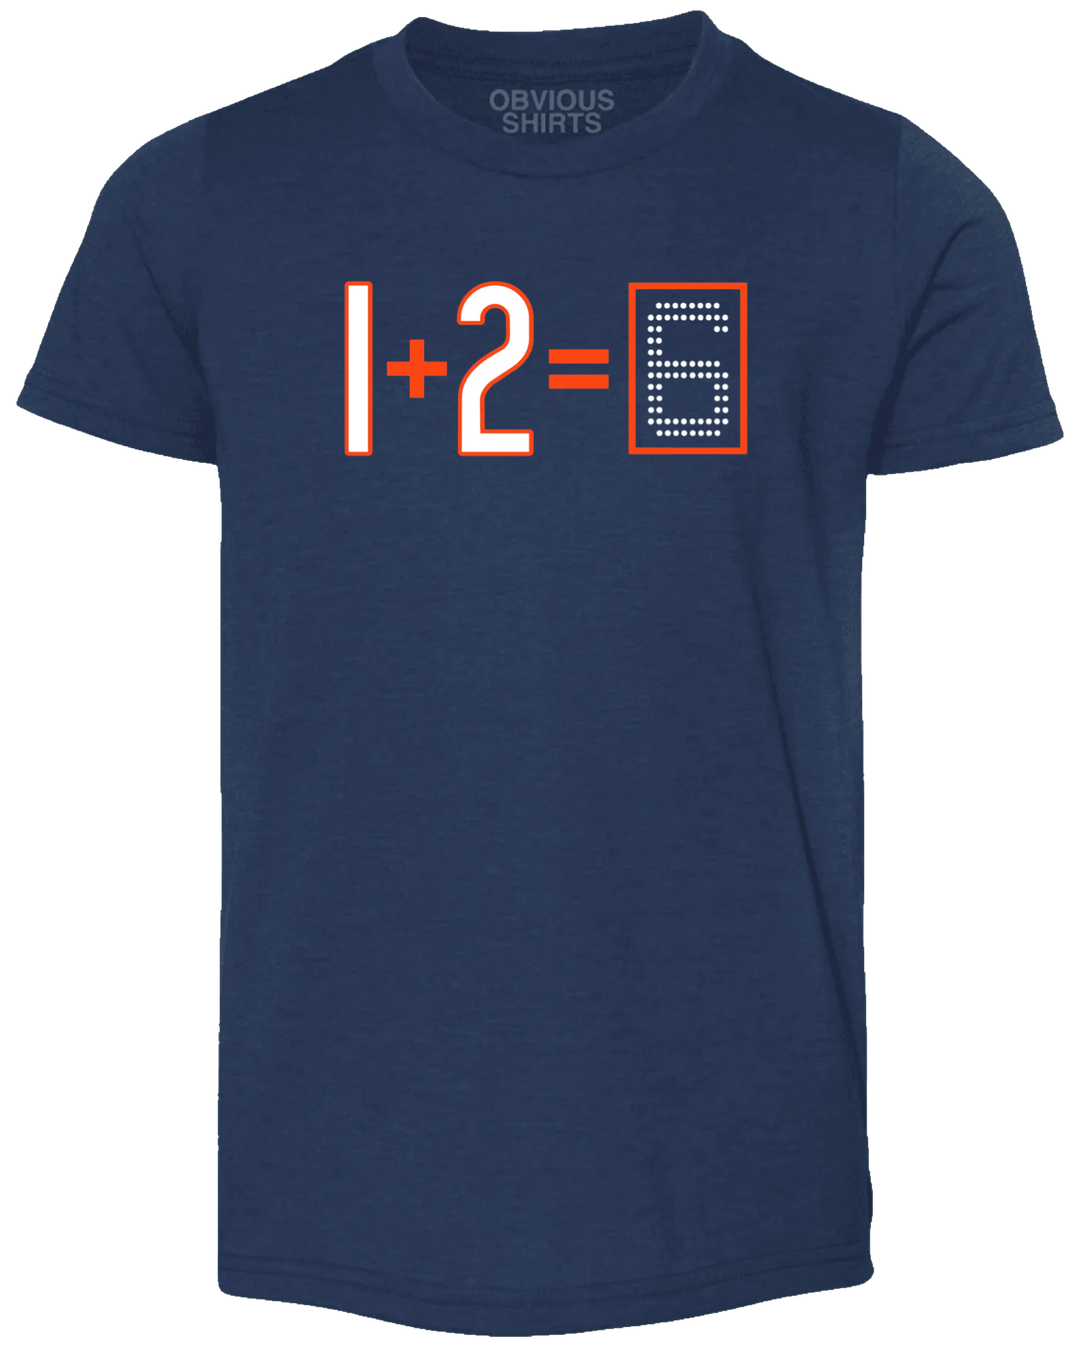 1+2=6 (YOUTH) - OBVIOUS SHIRTS